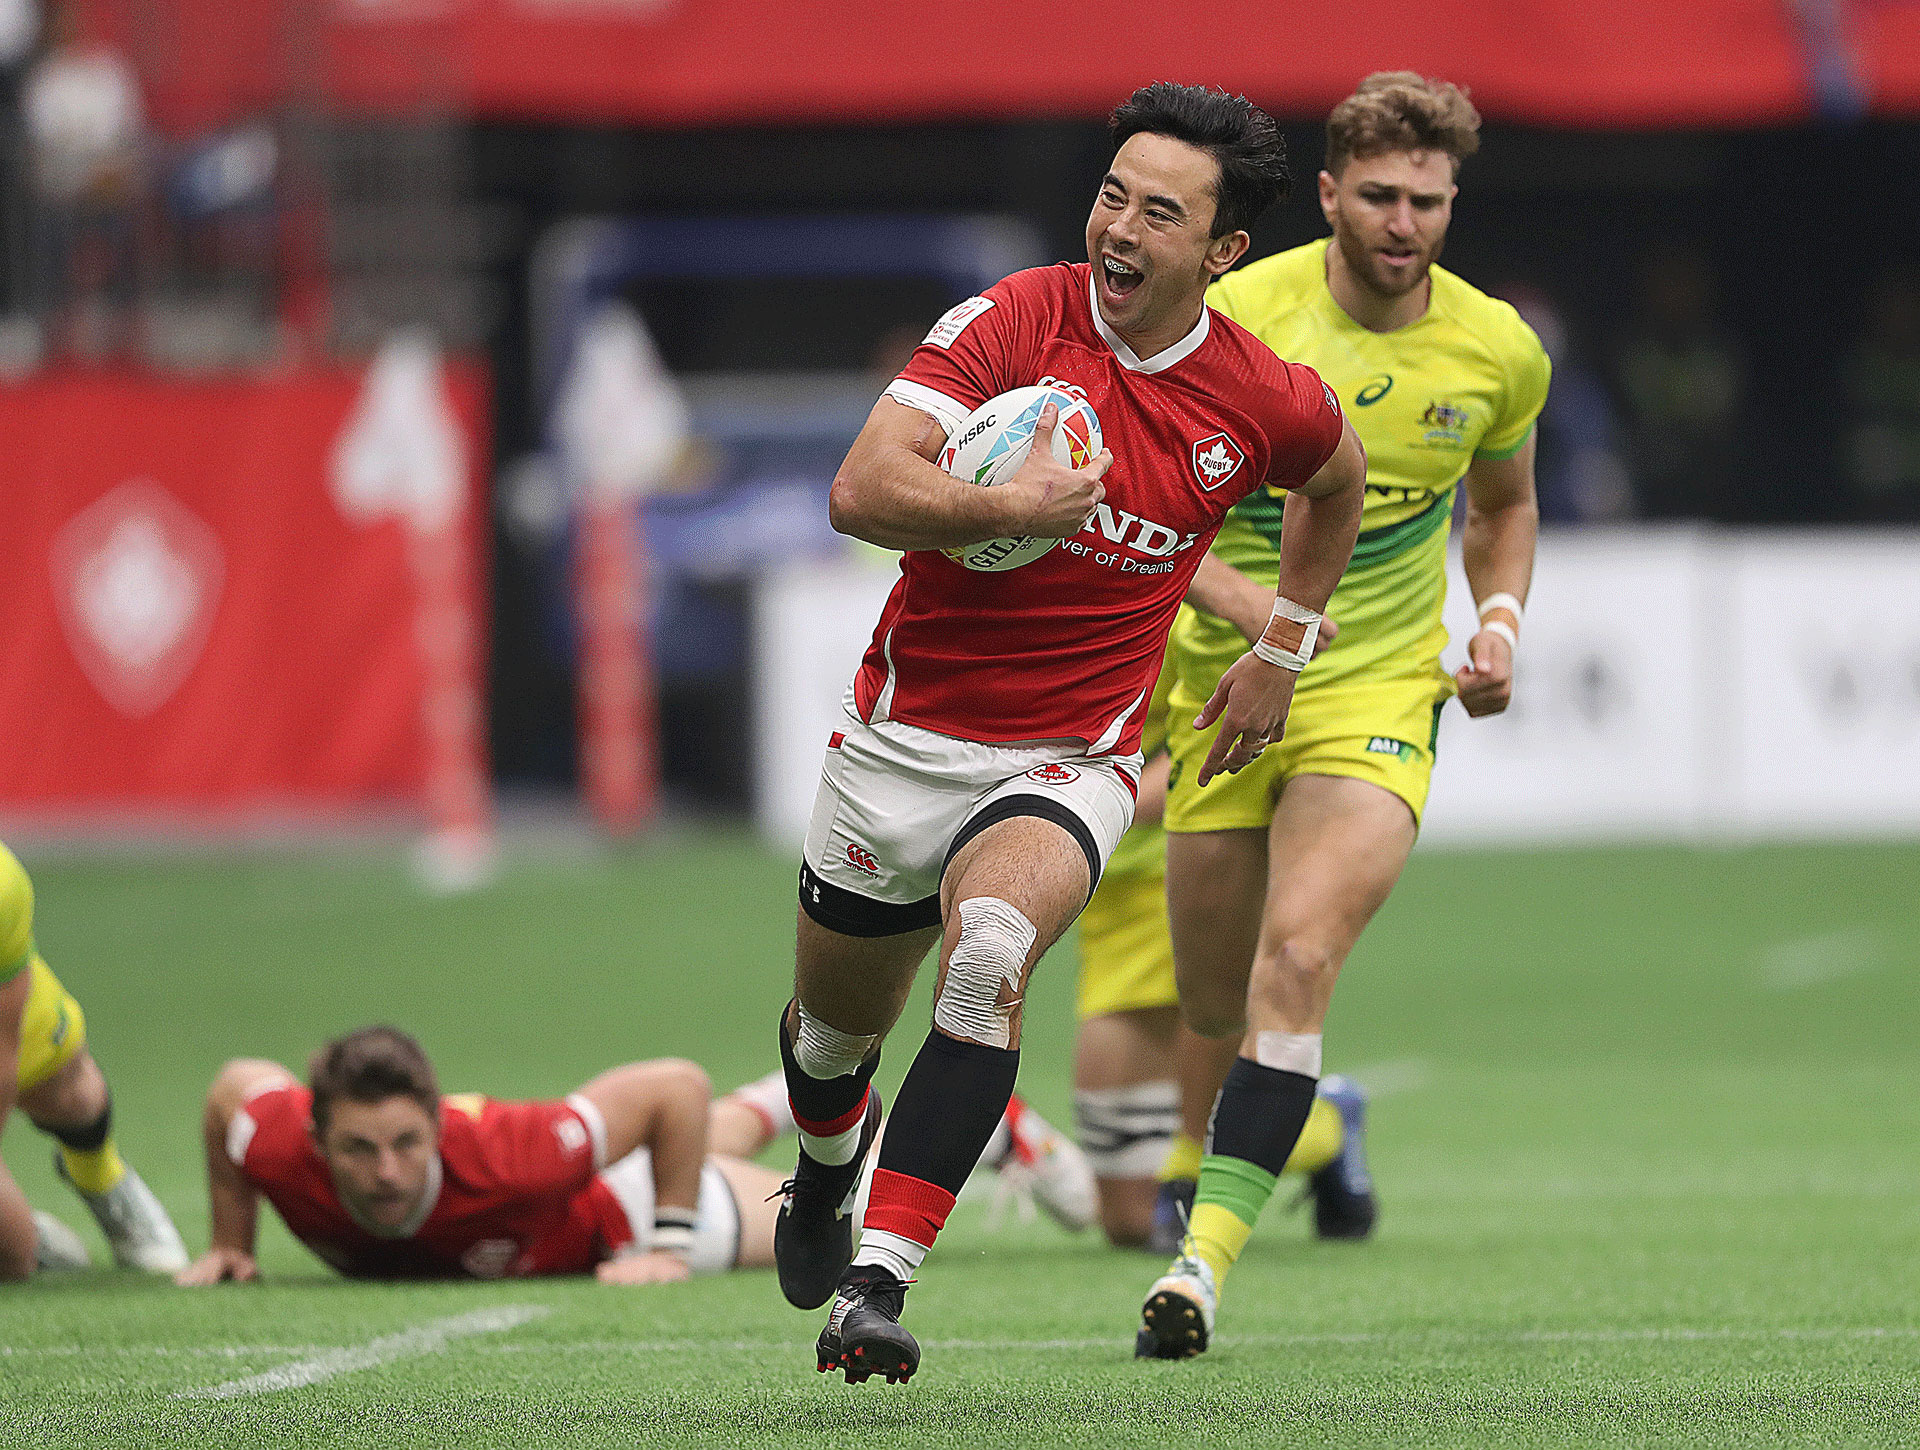 Nathan Hirayama #9 of Canada smiles as he breaks away during their semi final rugby sevens match against Australia at BC Place on March 08, 2020 in Vancouver, Canada.